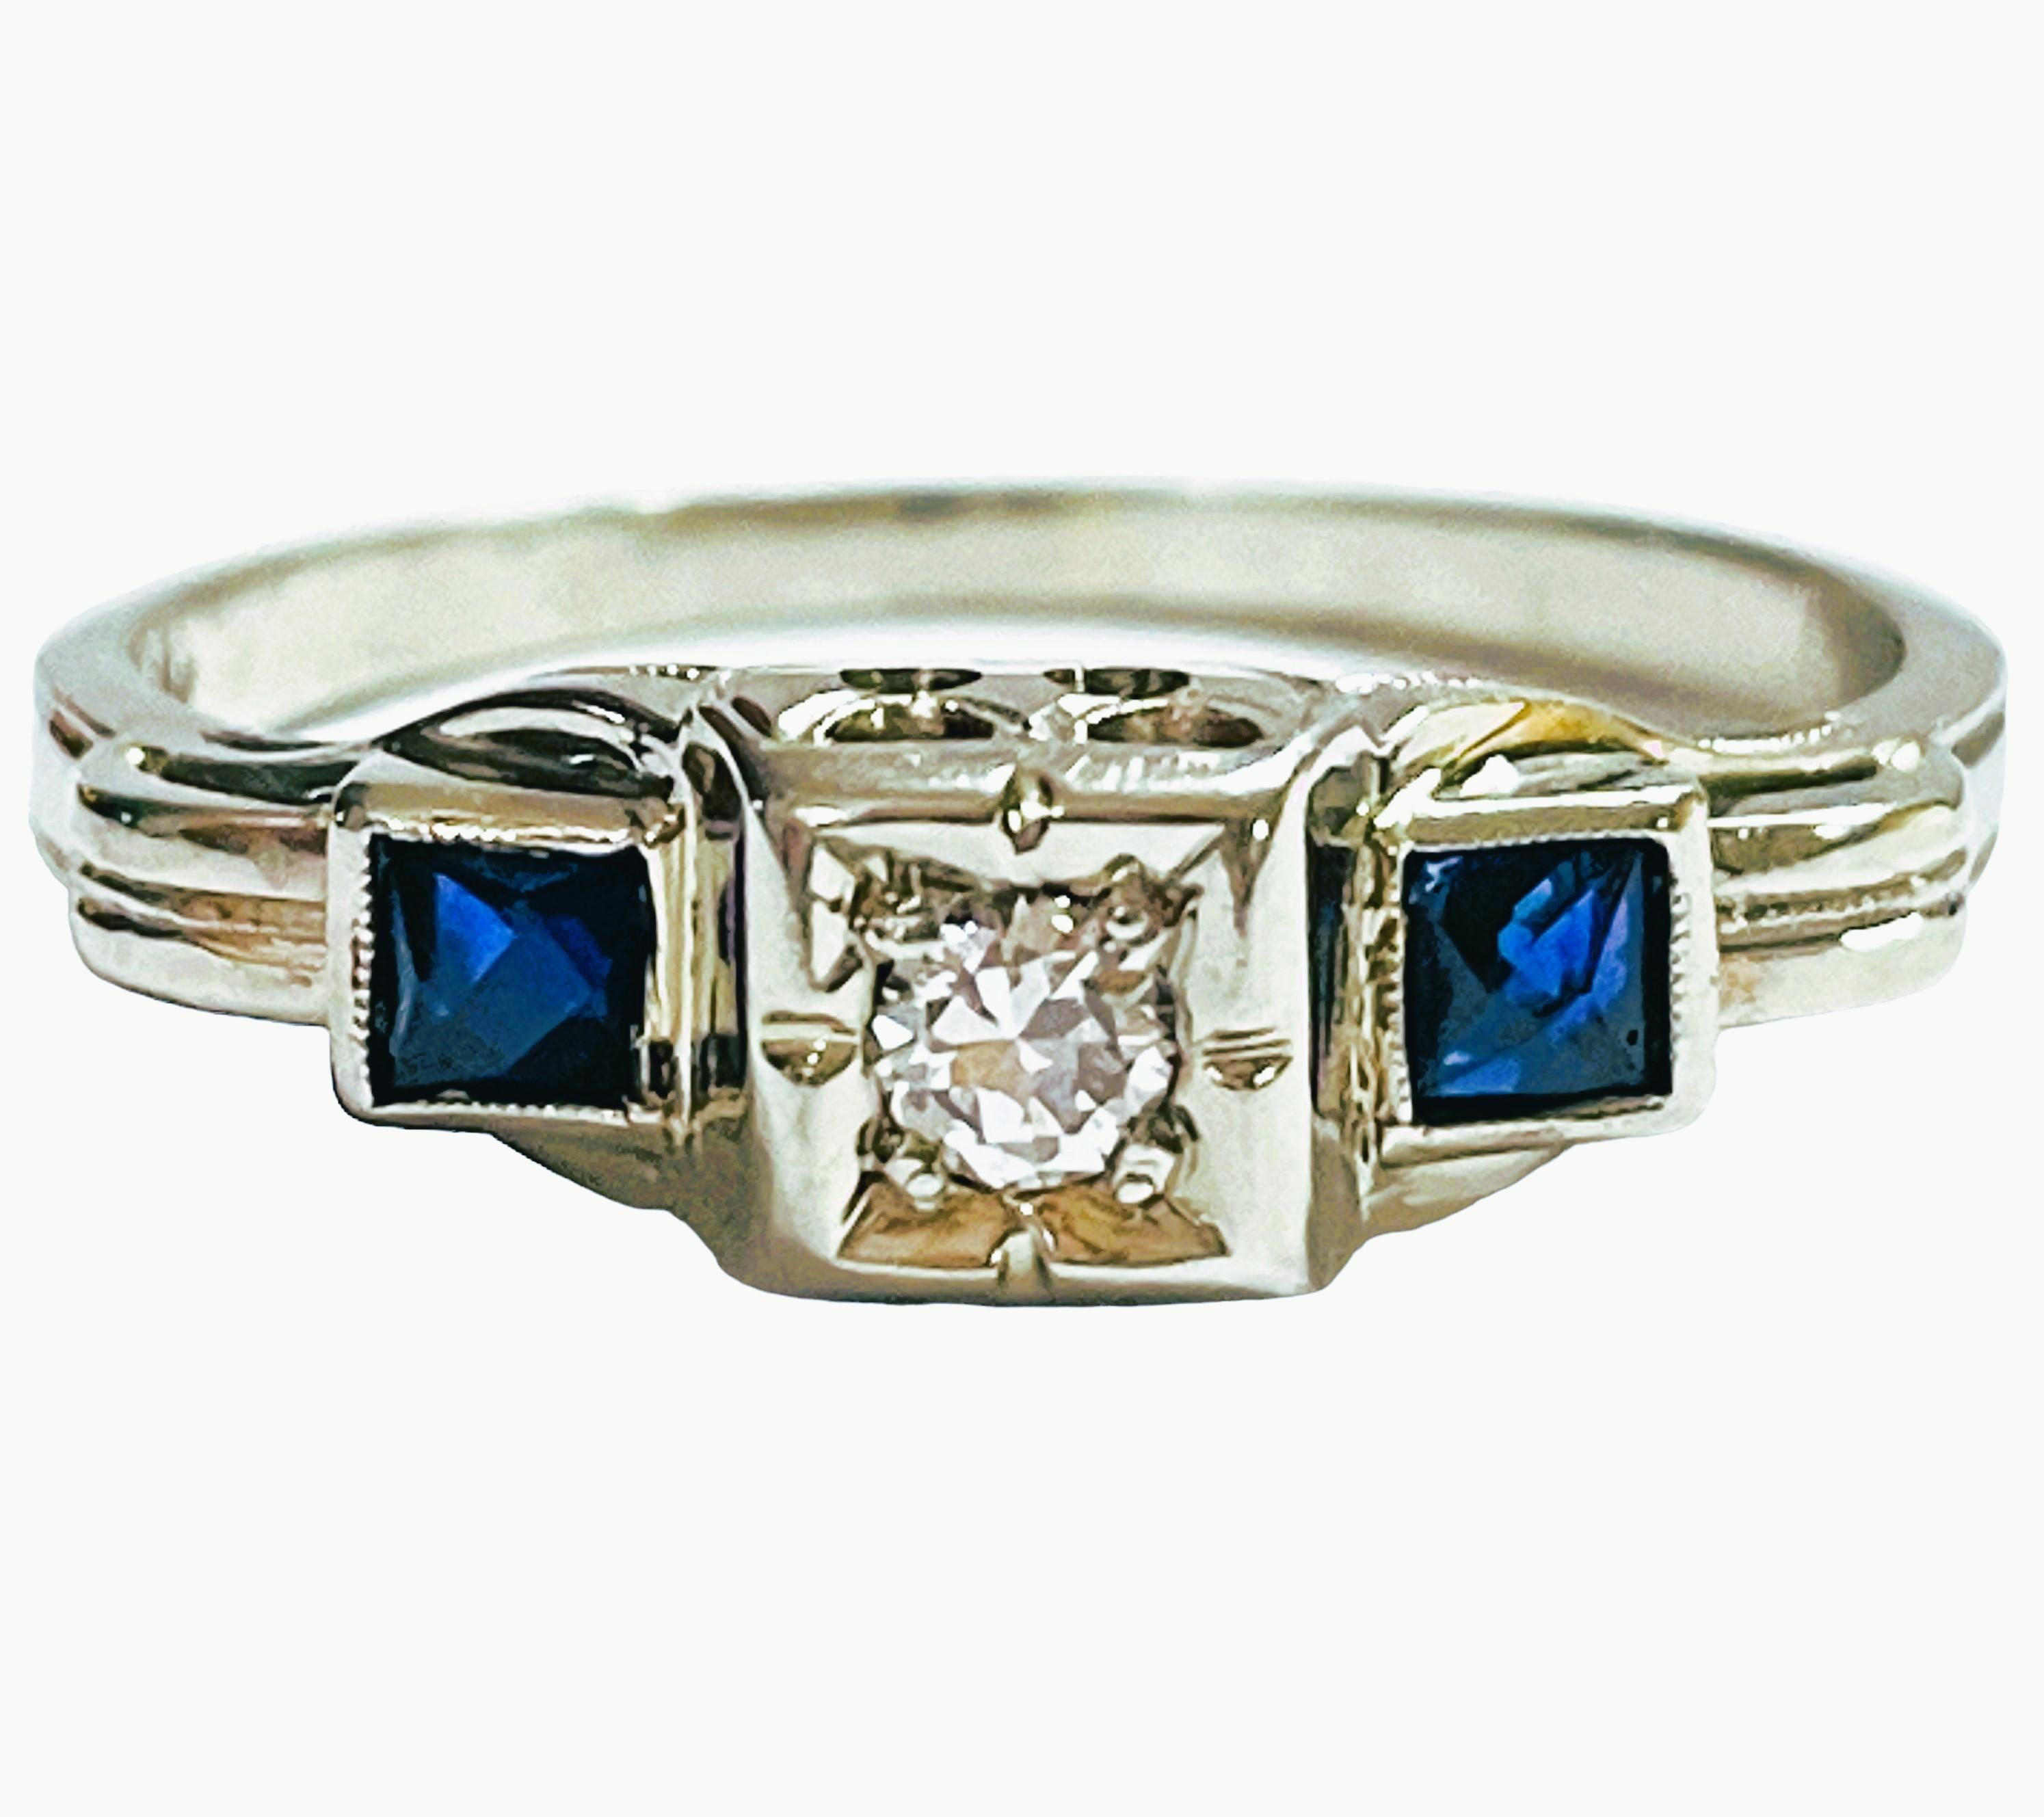 Art Deco Vintage 18k White Gold Diamond and Sapphire Ring with Appraisal